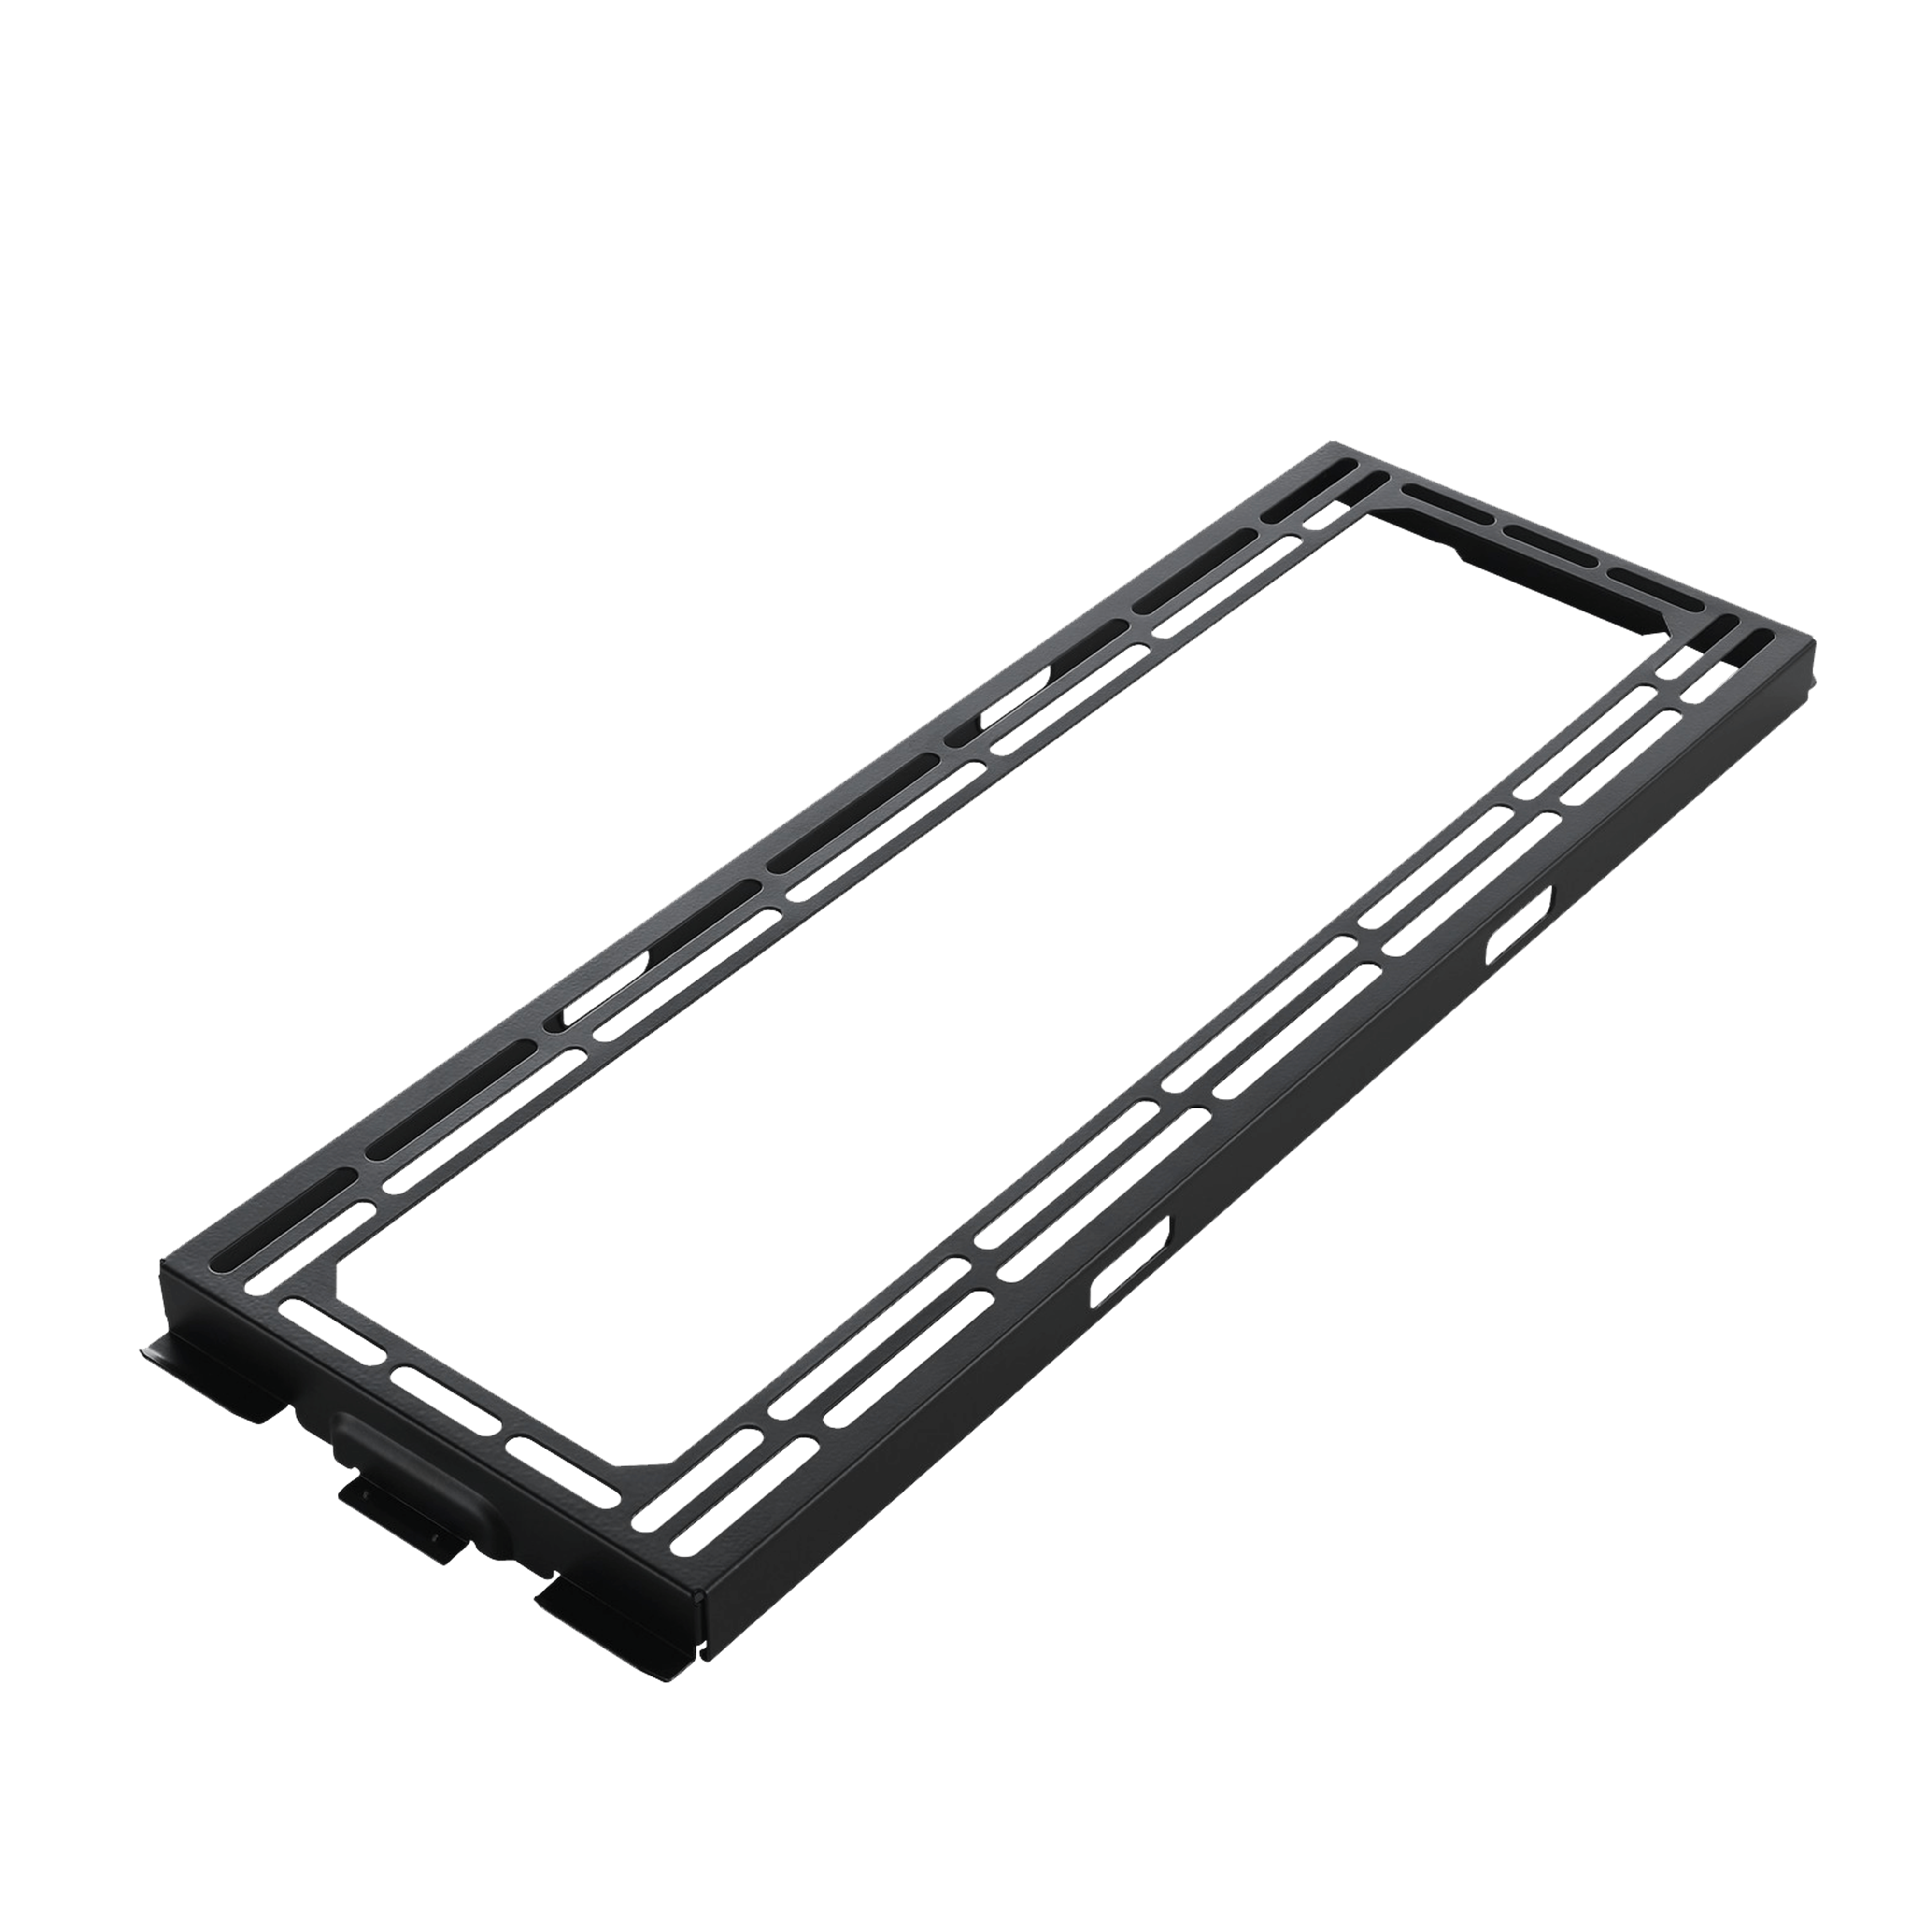 Cooler Master Accessory C700 Series Rear Panel cover to Maximize Airflow for Chimney Effect Air ventilation